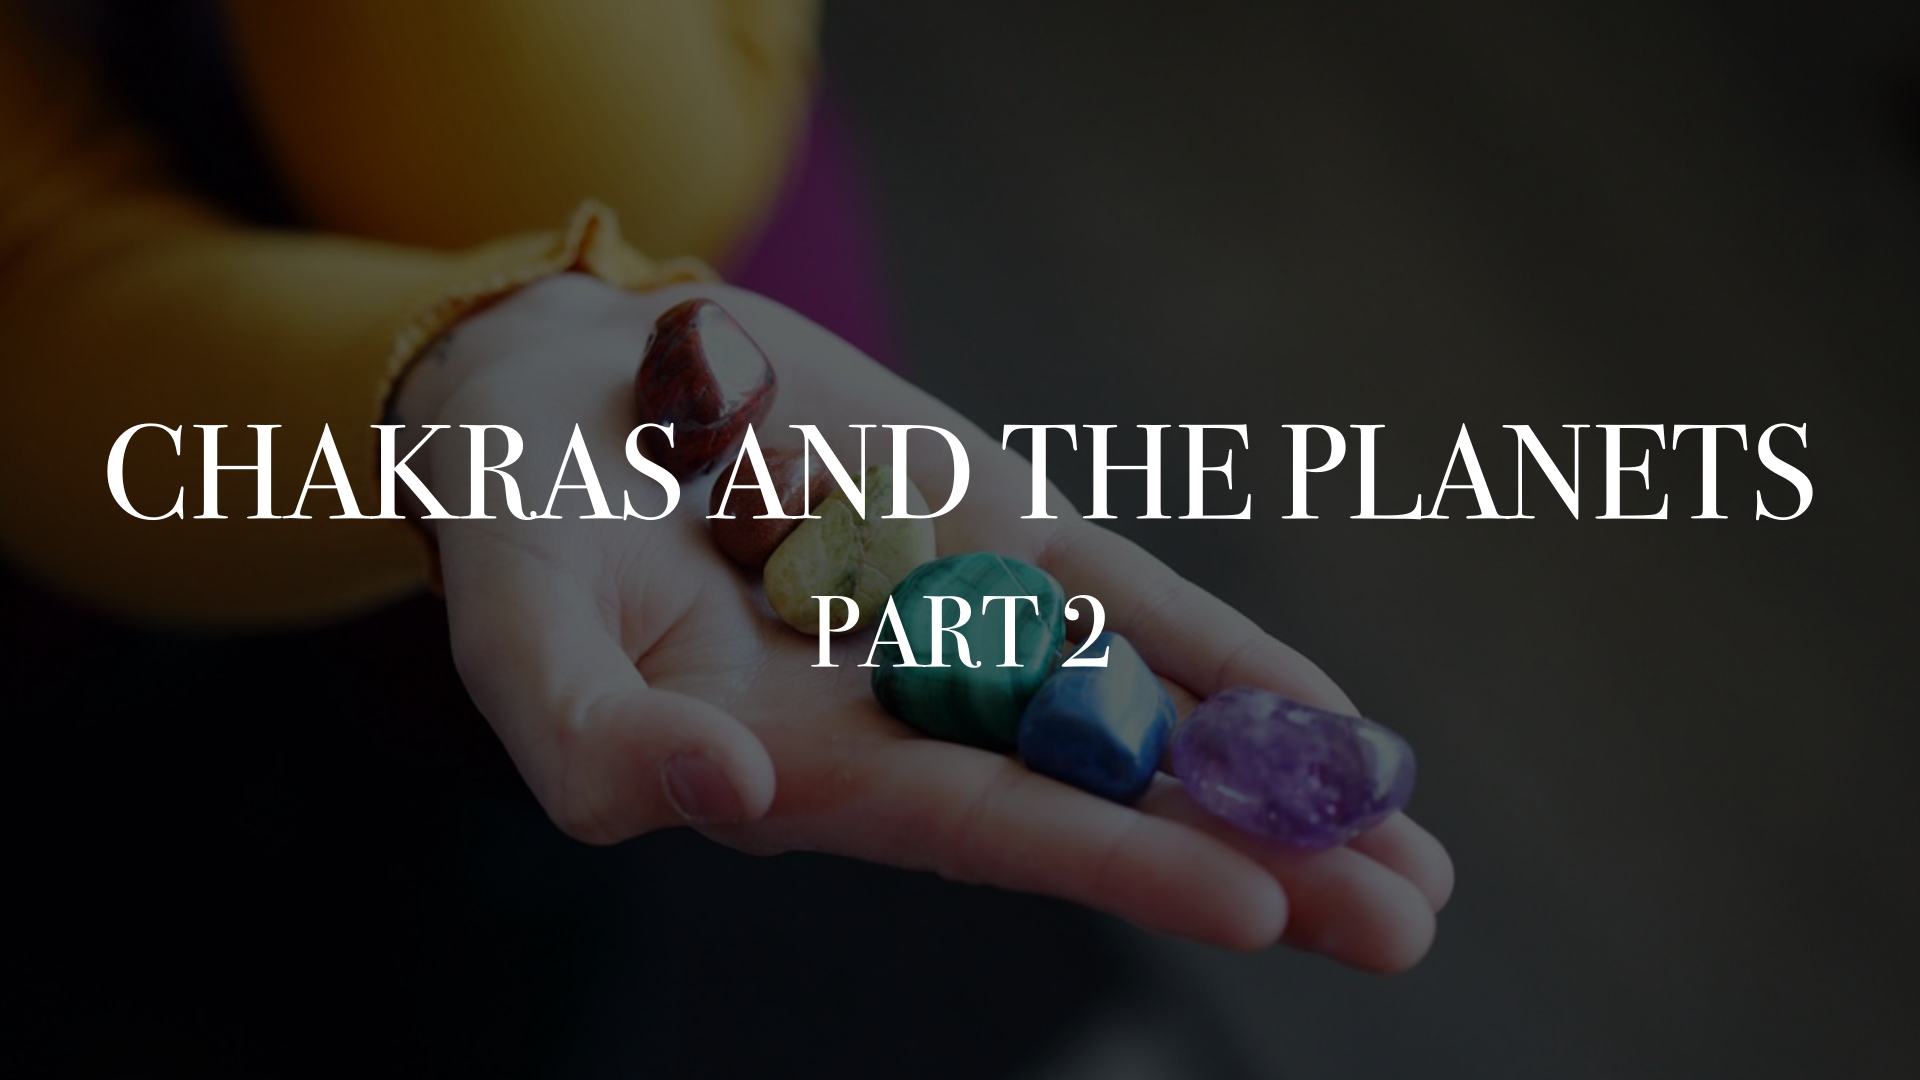 CHAKRAS AND THE PLANETS PART 2